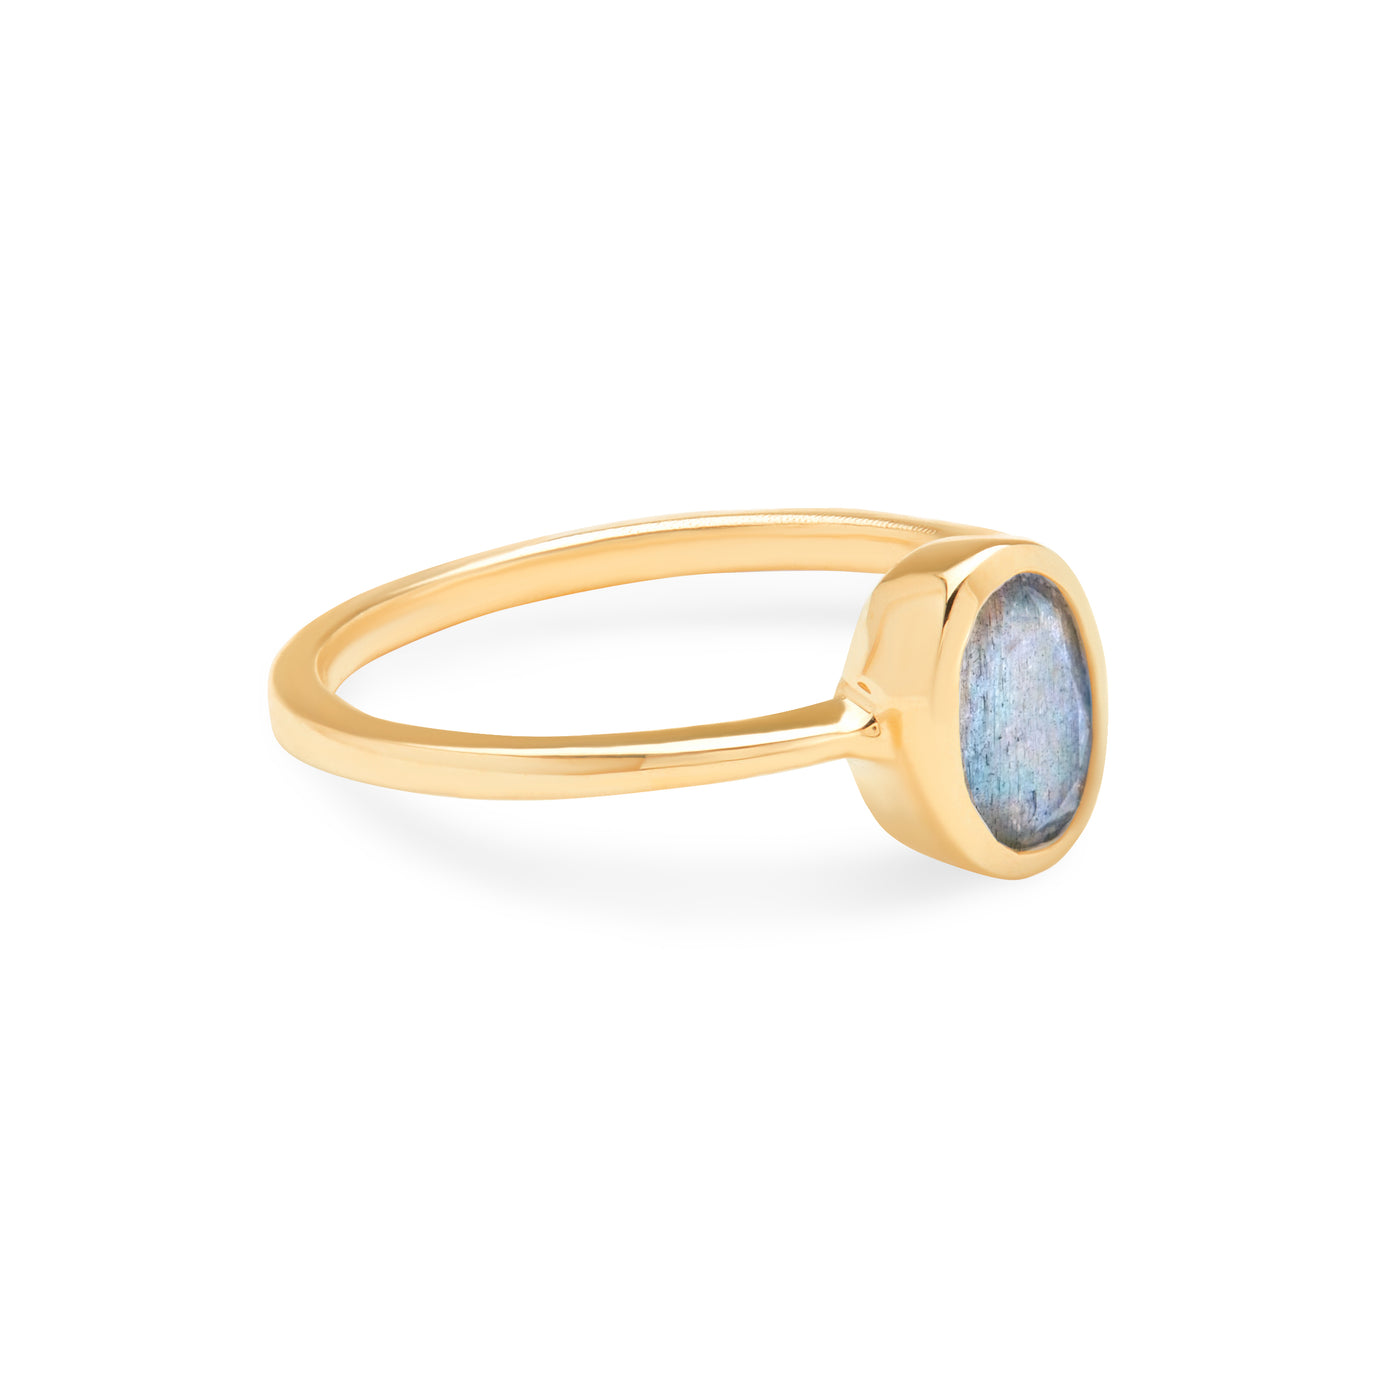 14 Karat Yellow Gold Ring with Oval Shaped Labradorite Stone Against White Background Turned To Side